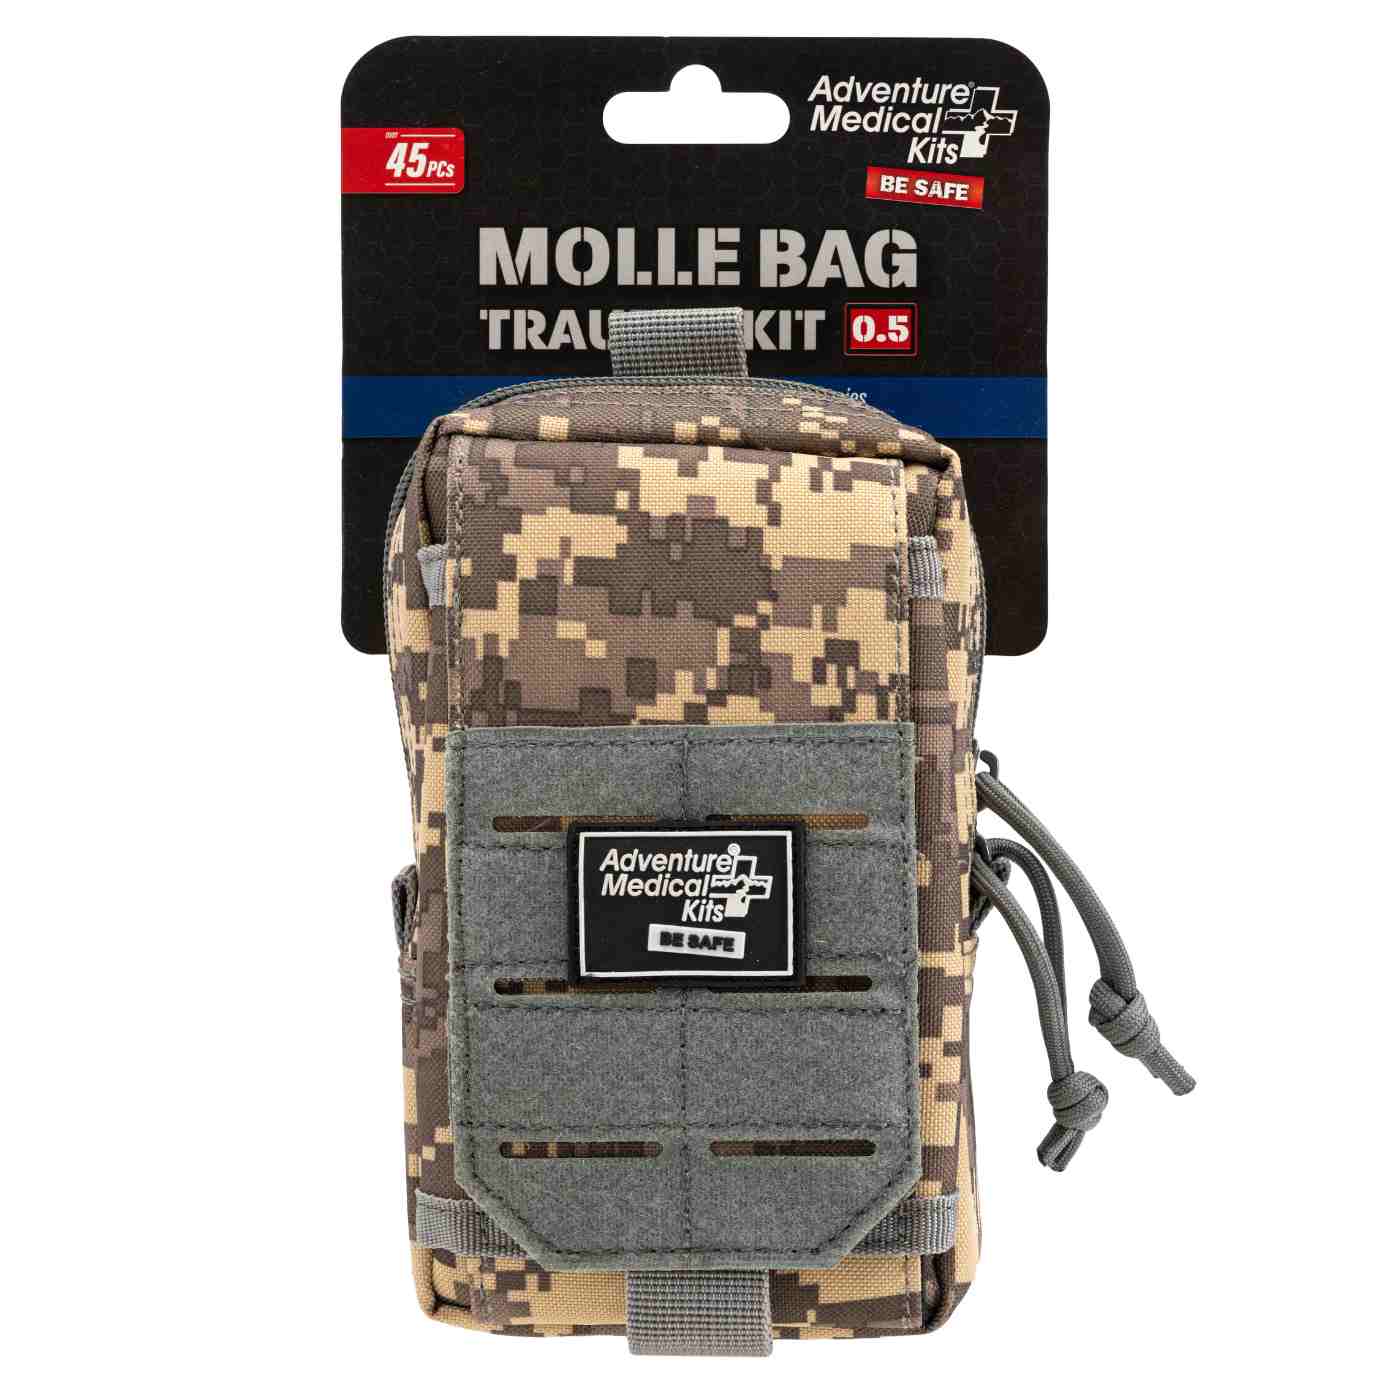 MOLLE Bag Trauma Kit 0.5 - Camo front in packaging